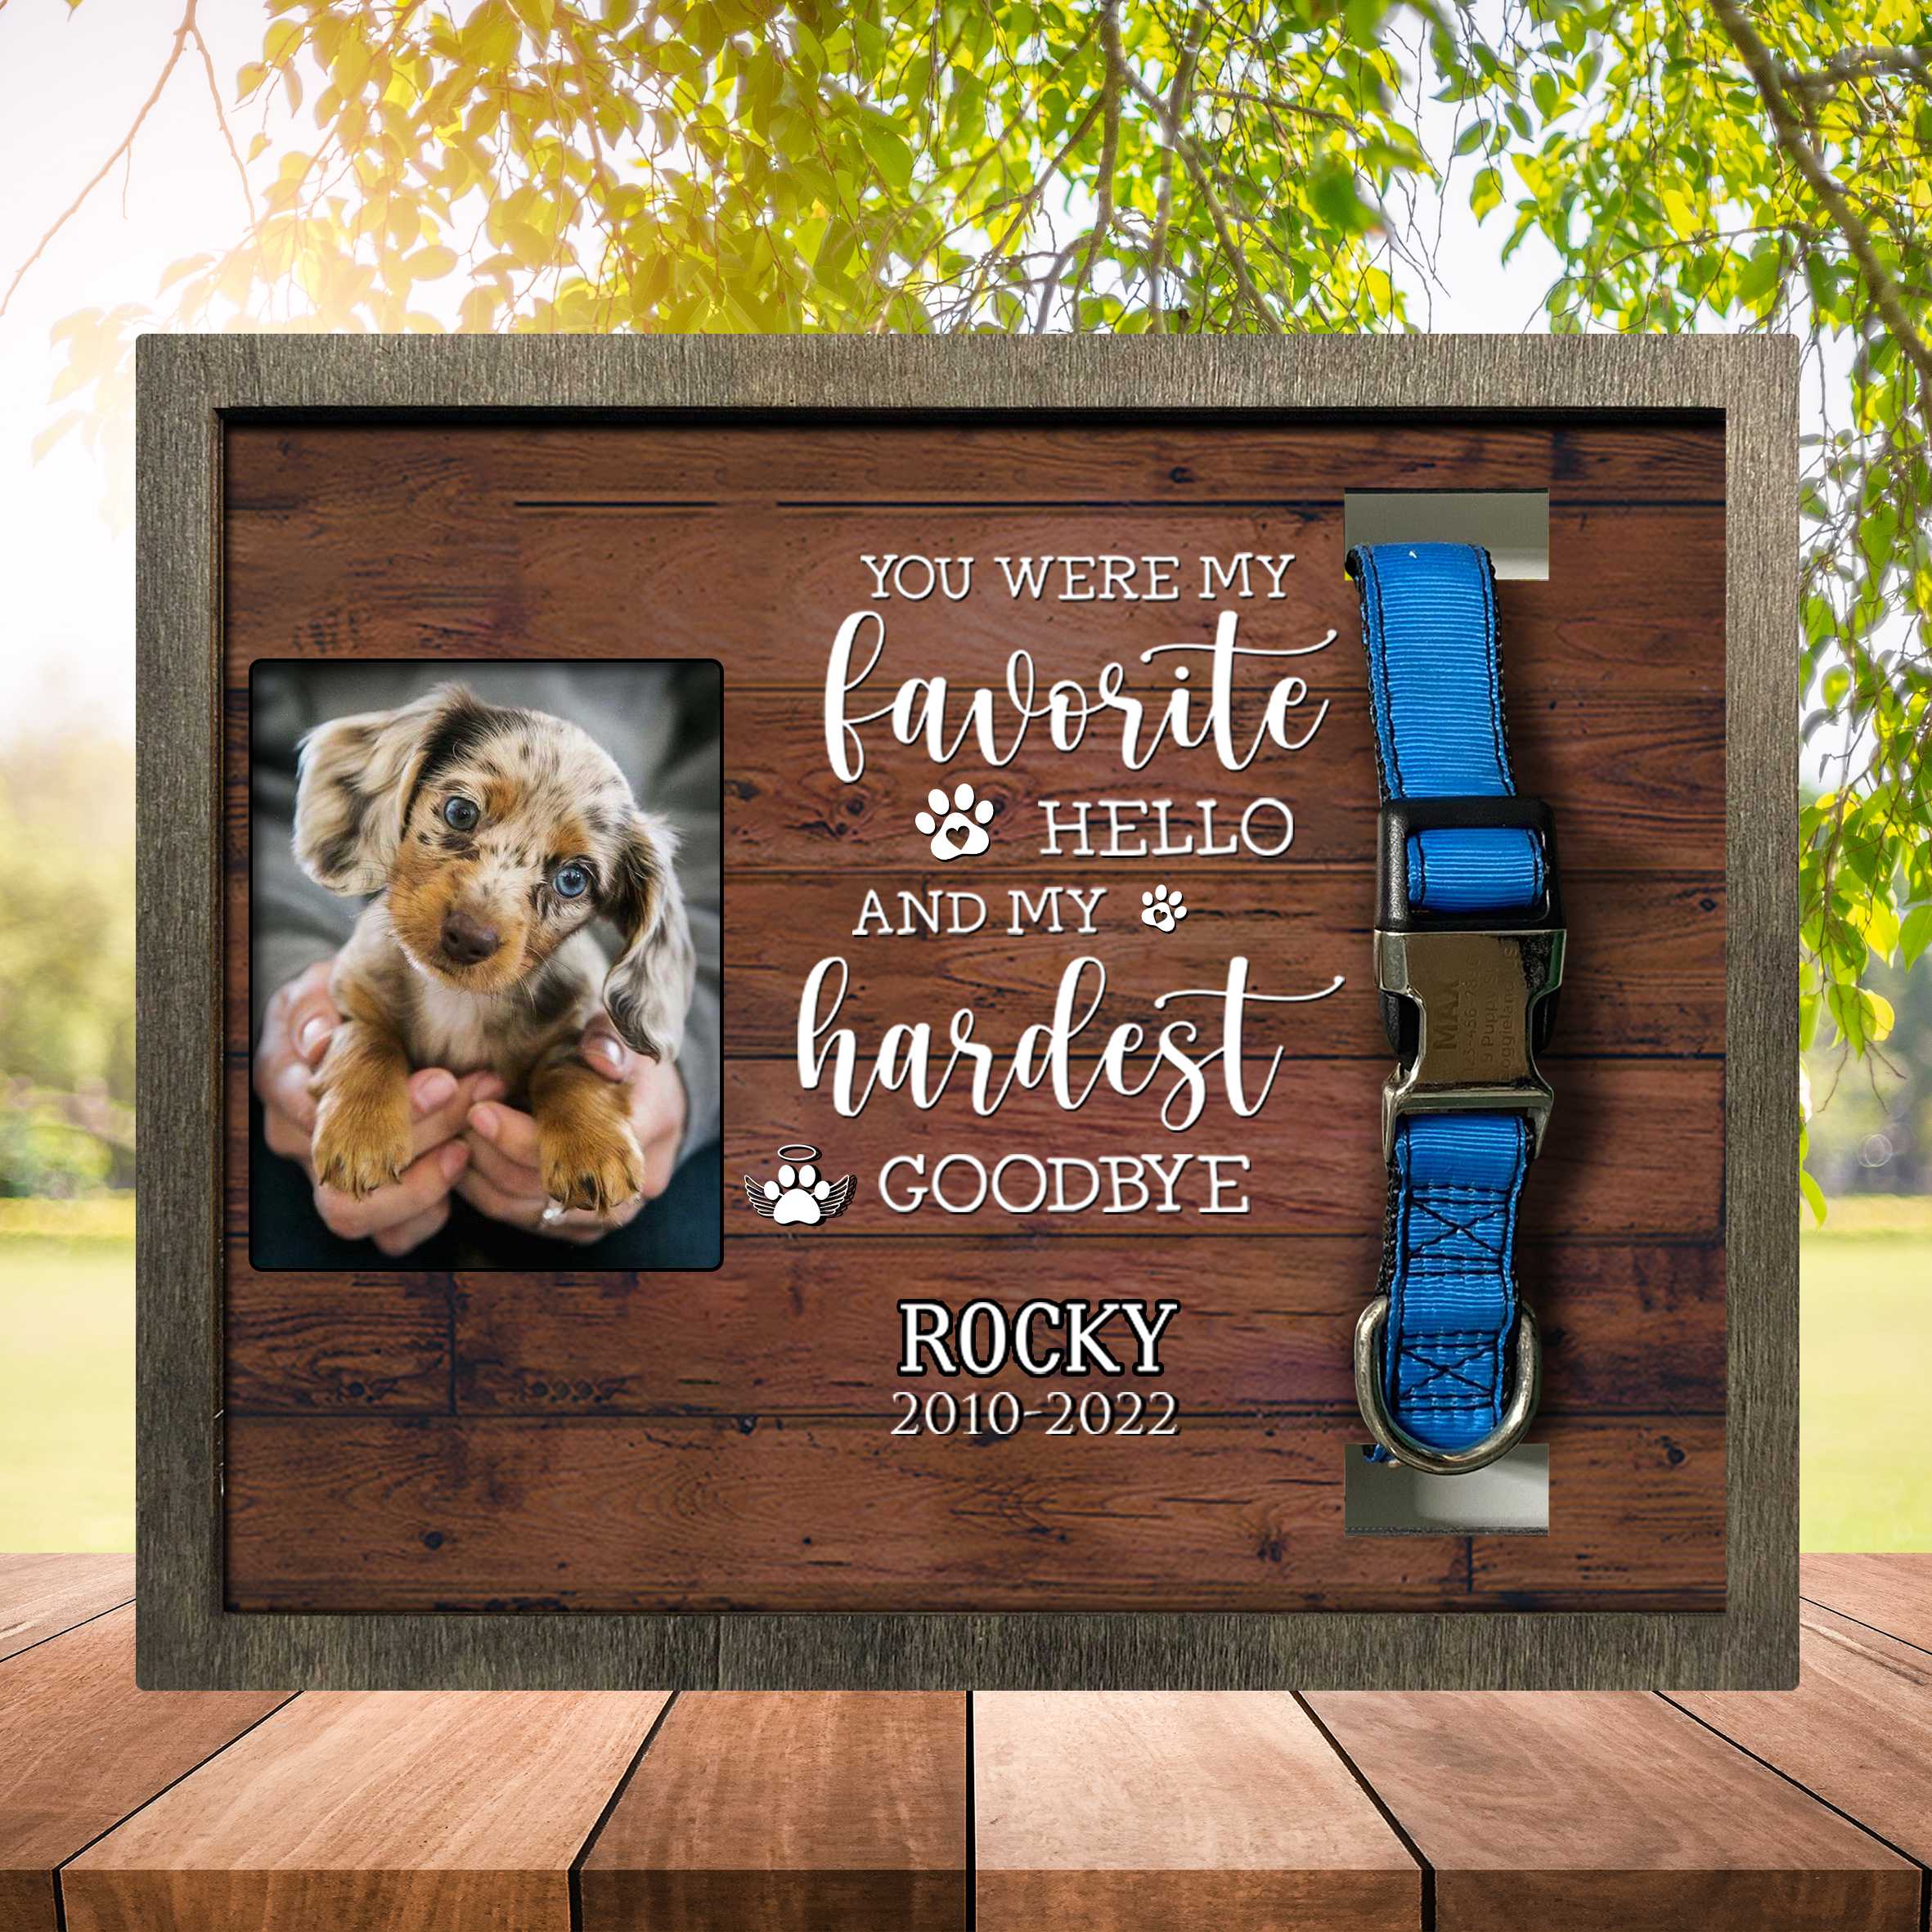 Pet Loss Gifts For Loss Of Dog/ Dog Frames For Pictures Memorial Dog Remembrance/ Sympathy Picture Frame